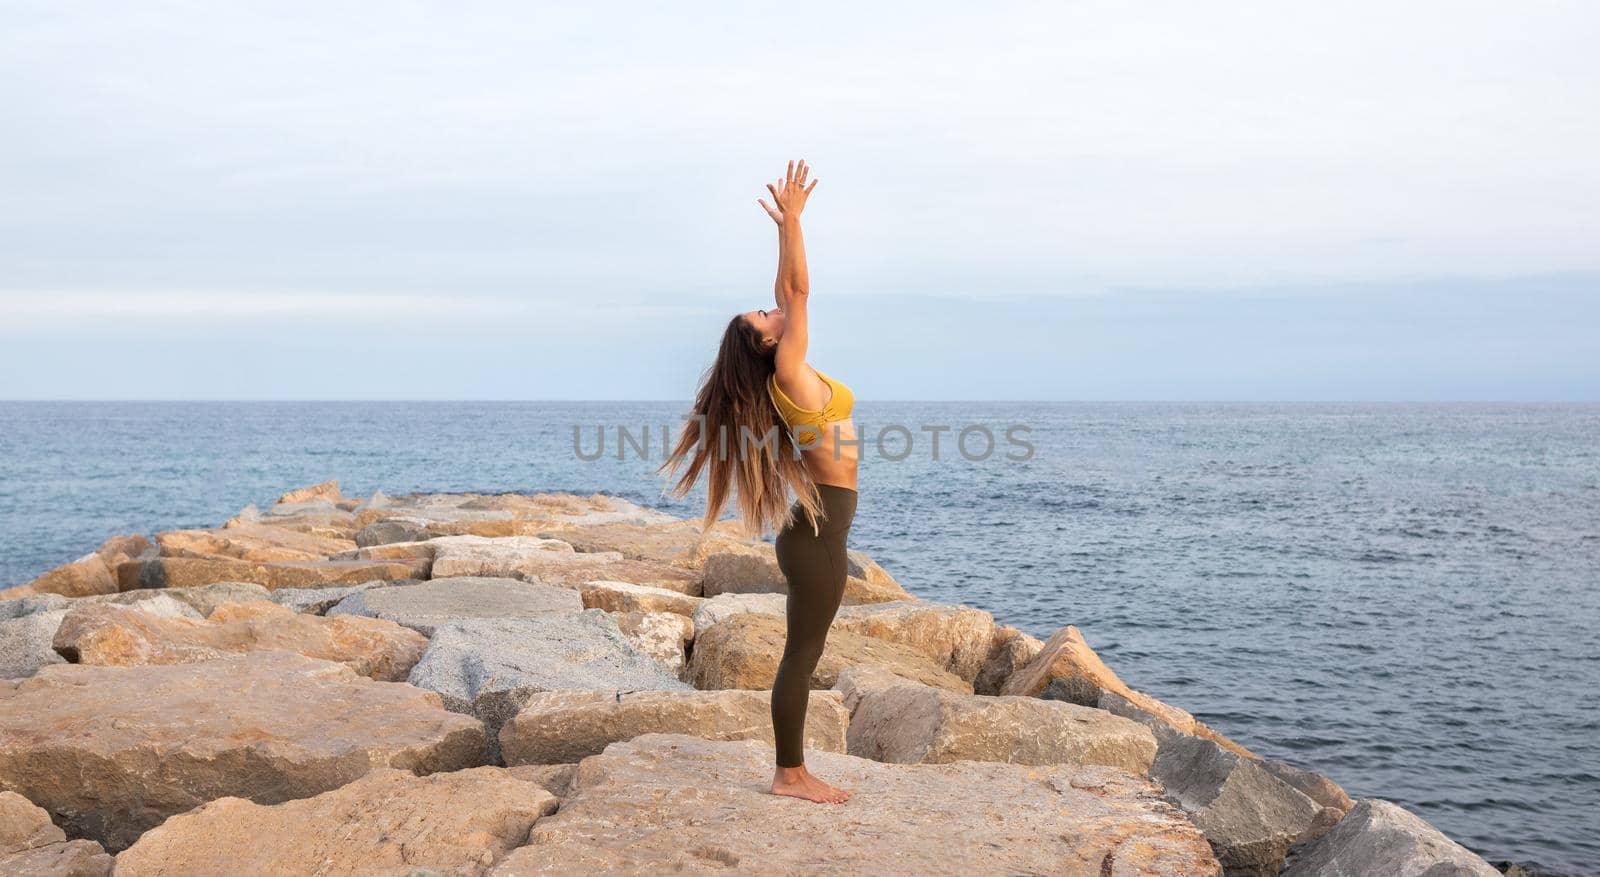 Panoramic image of young woman doing yoga on a breakwater near the sea. Urdva hastasana pose. Copy space. Healthy and active lifestyle.